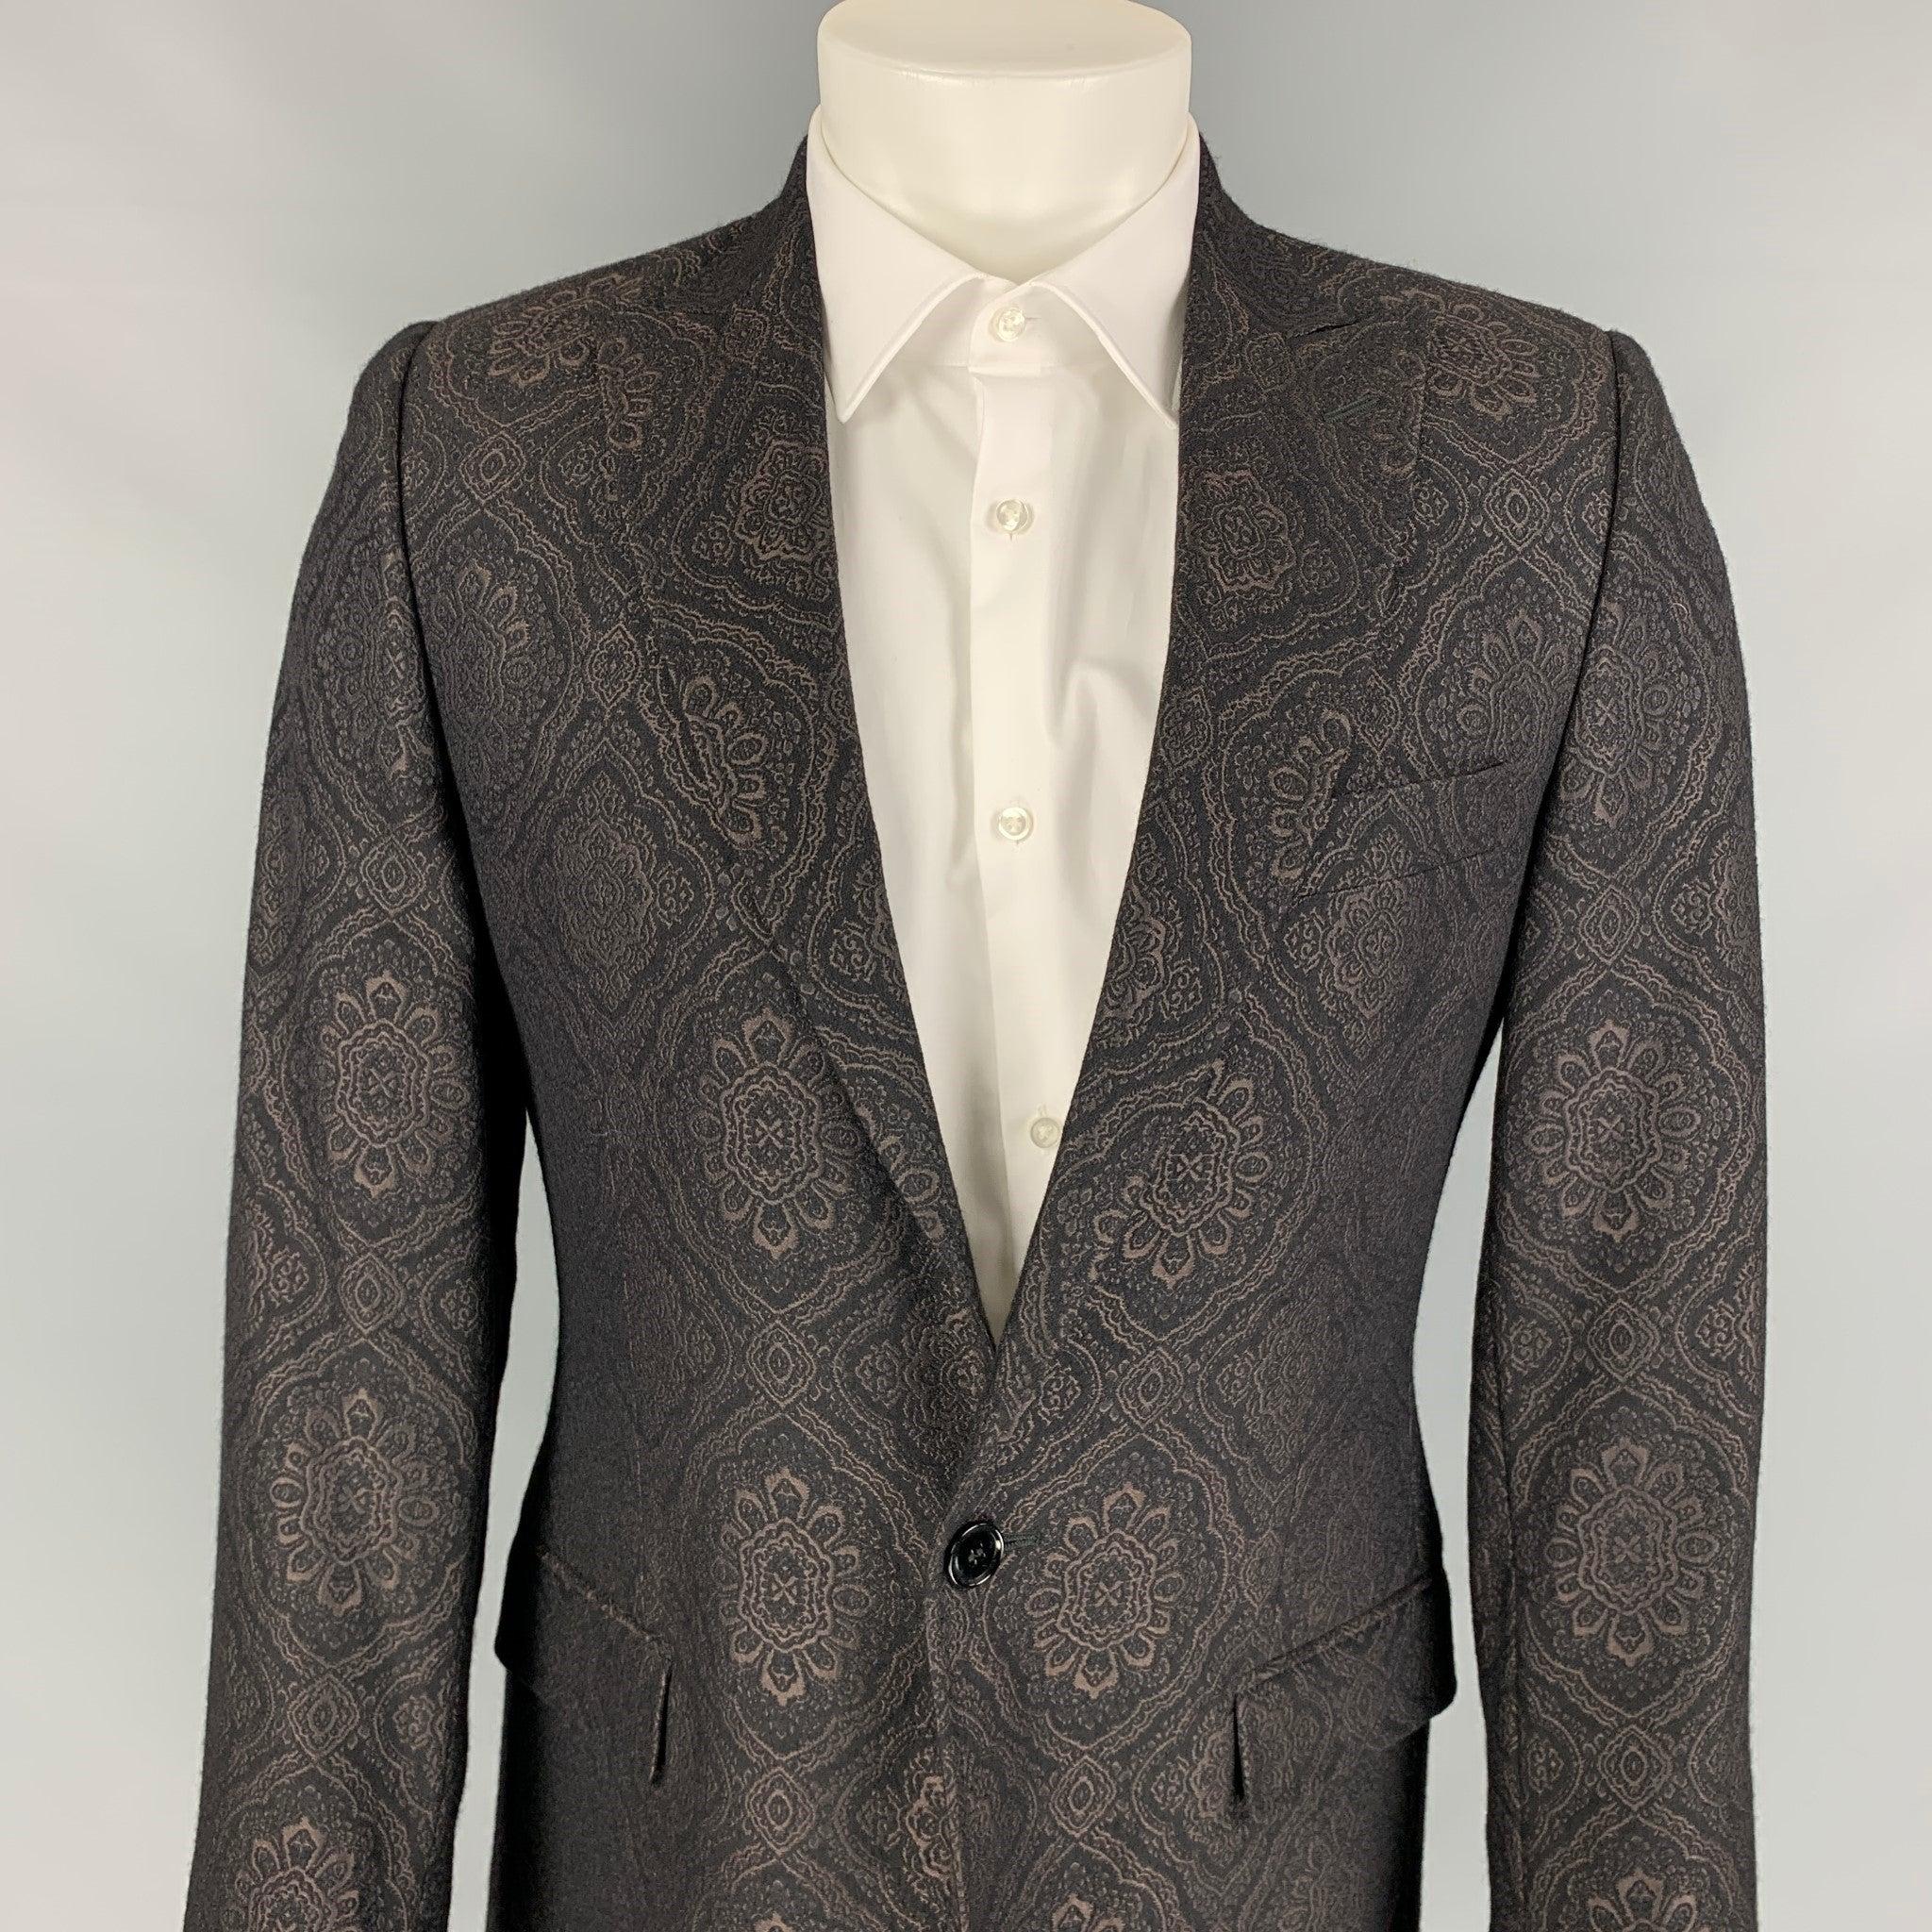 Vintage DOLCE & GABBANA sport coat comes in a black jacquard wool / silk with a full liner featuring a peak lapel, flap pockets, single back vent, and a single button closure.
Made in Italy. Very Good Pre-Owned Condition. 

Marked:   48